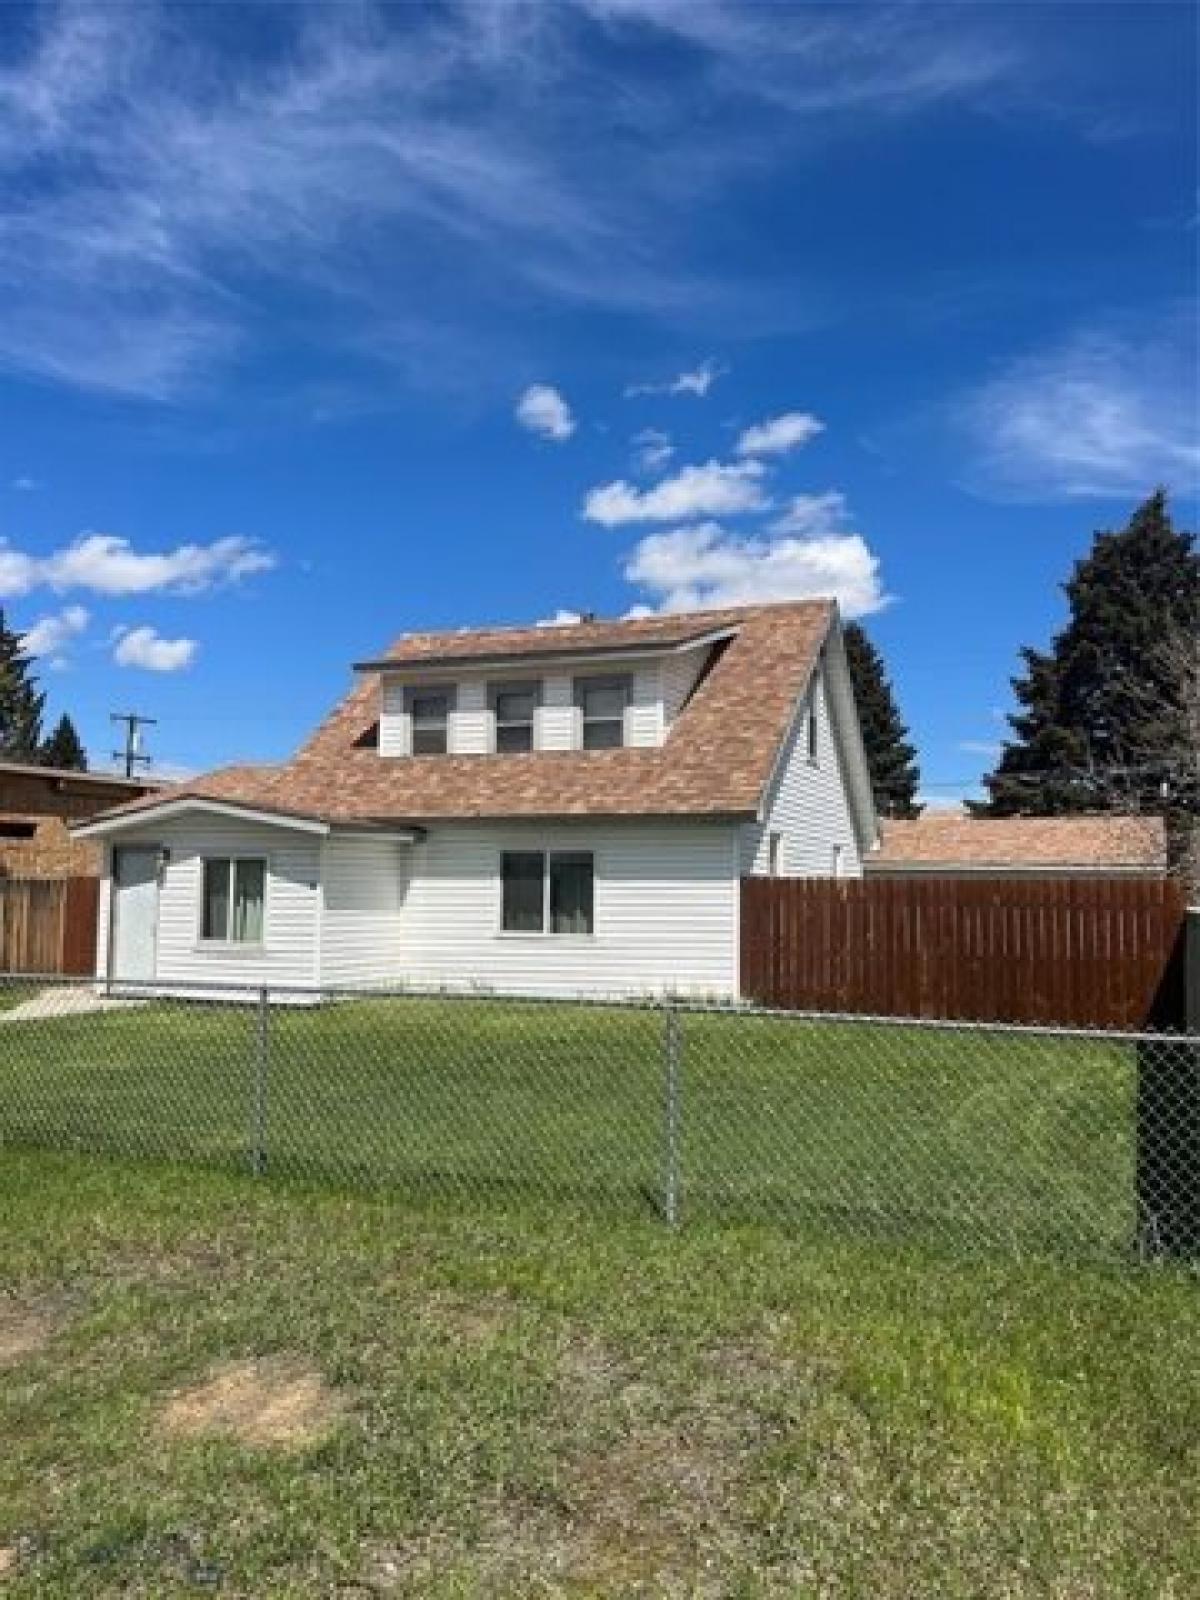 Picture of Home For Sale in Butte, Montana, United States